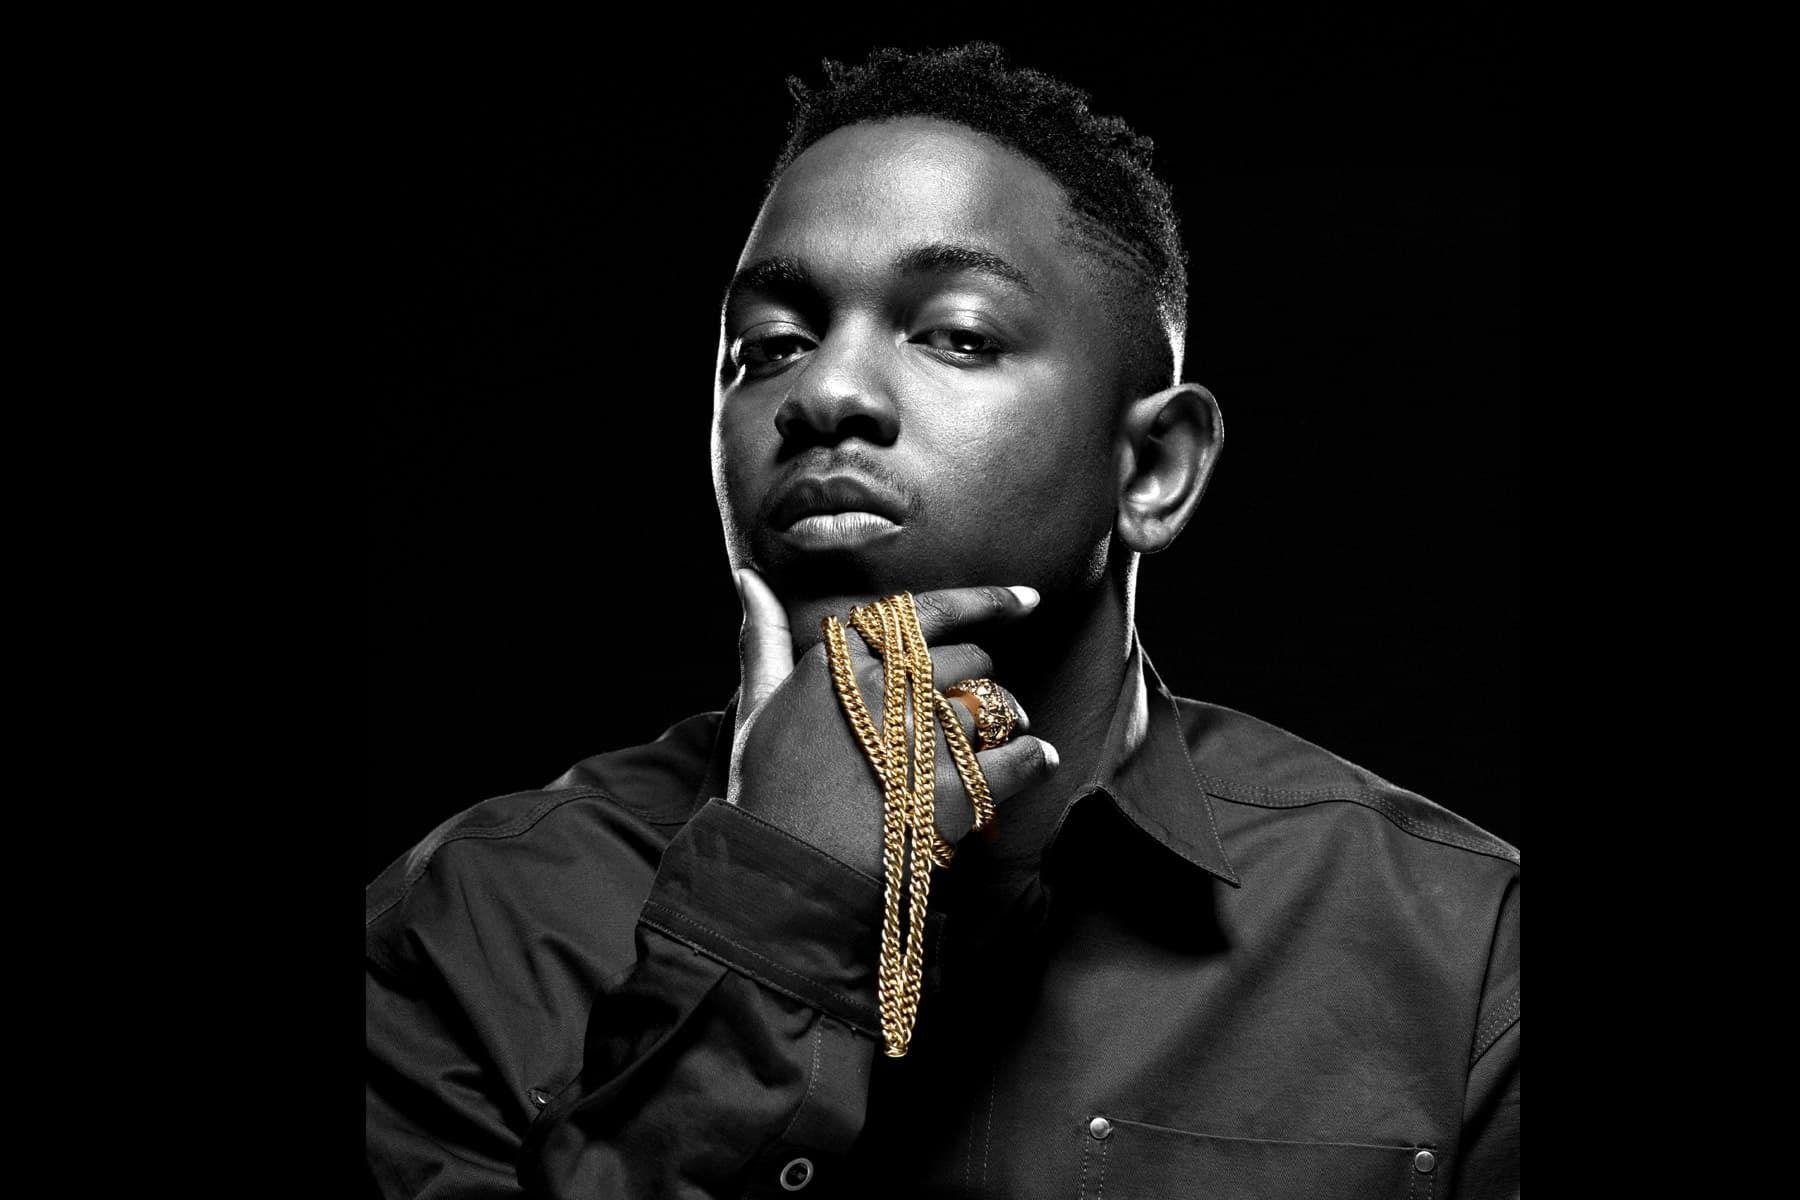 Kendrick Lamar Wallpapers Image Photos Pictures Backgrounds